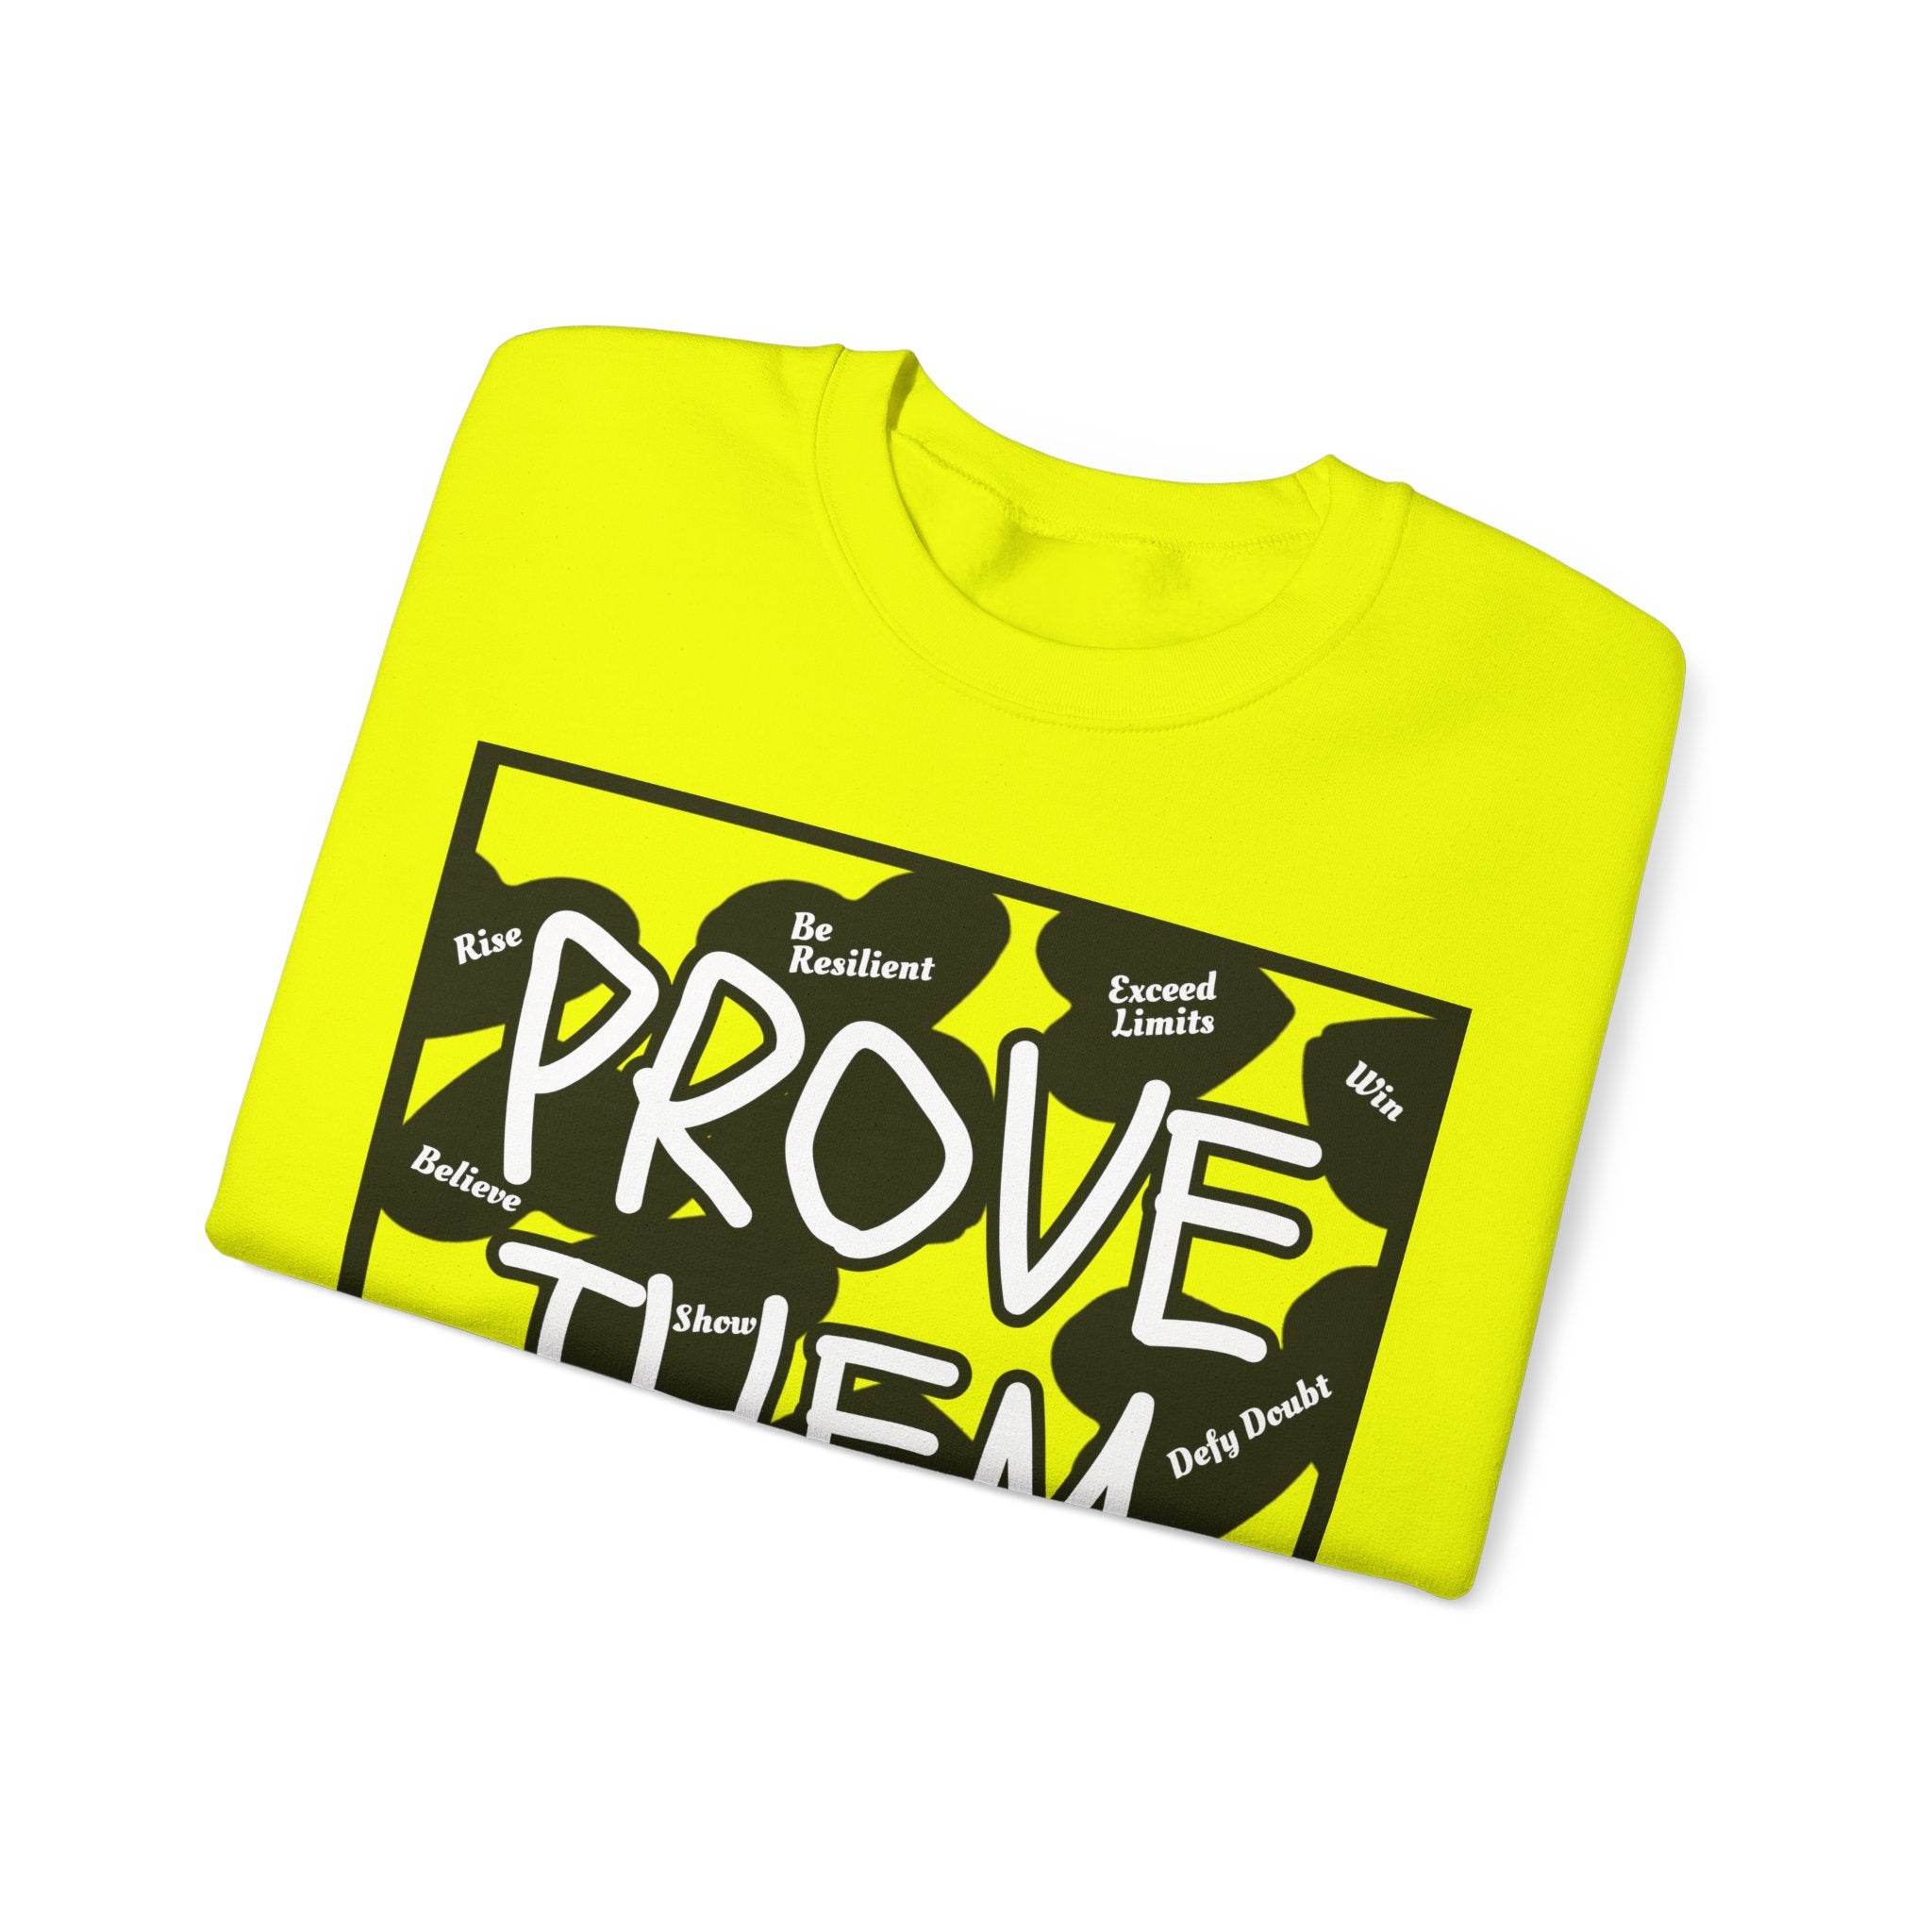 Prove Them Wrong Inspiration Sweatshirt (Safety Colors)